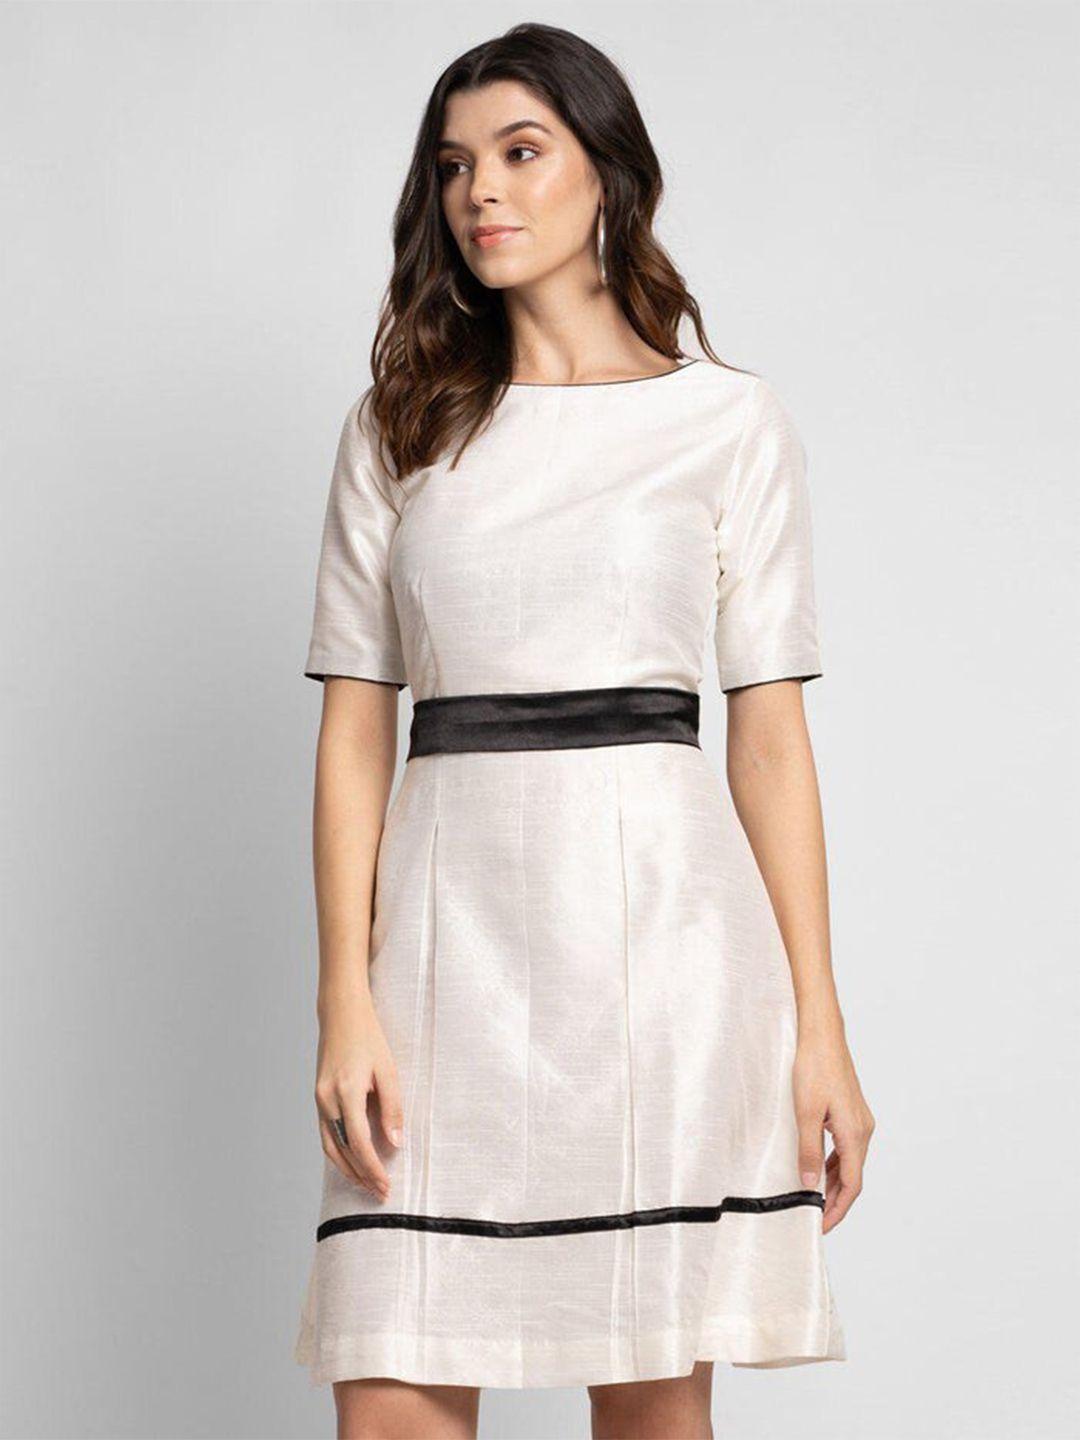 powersutra boat neck belted fit & flare dress